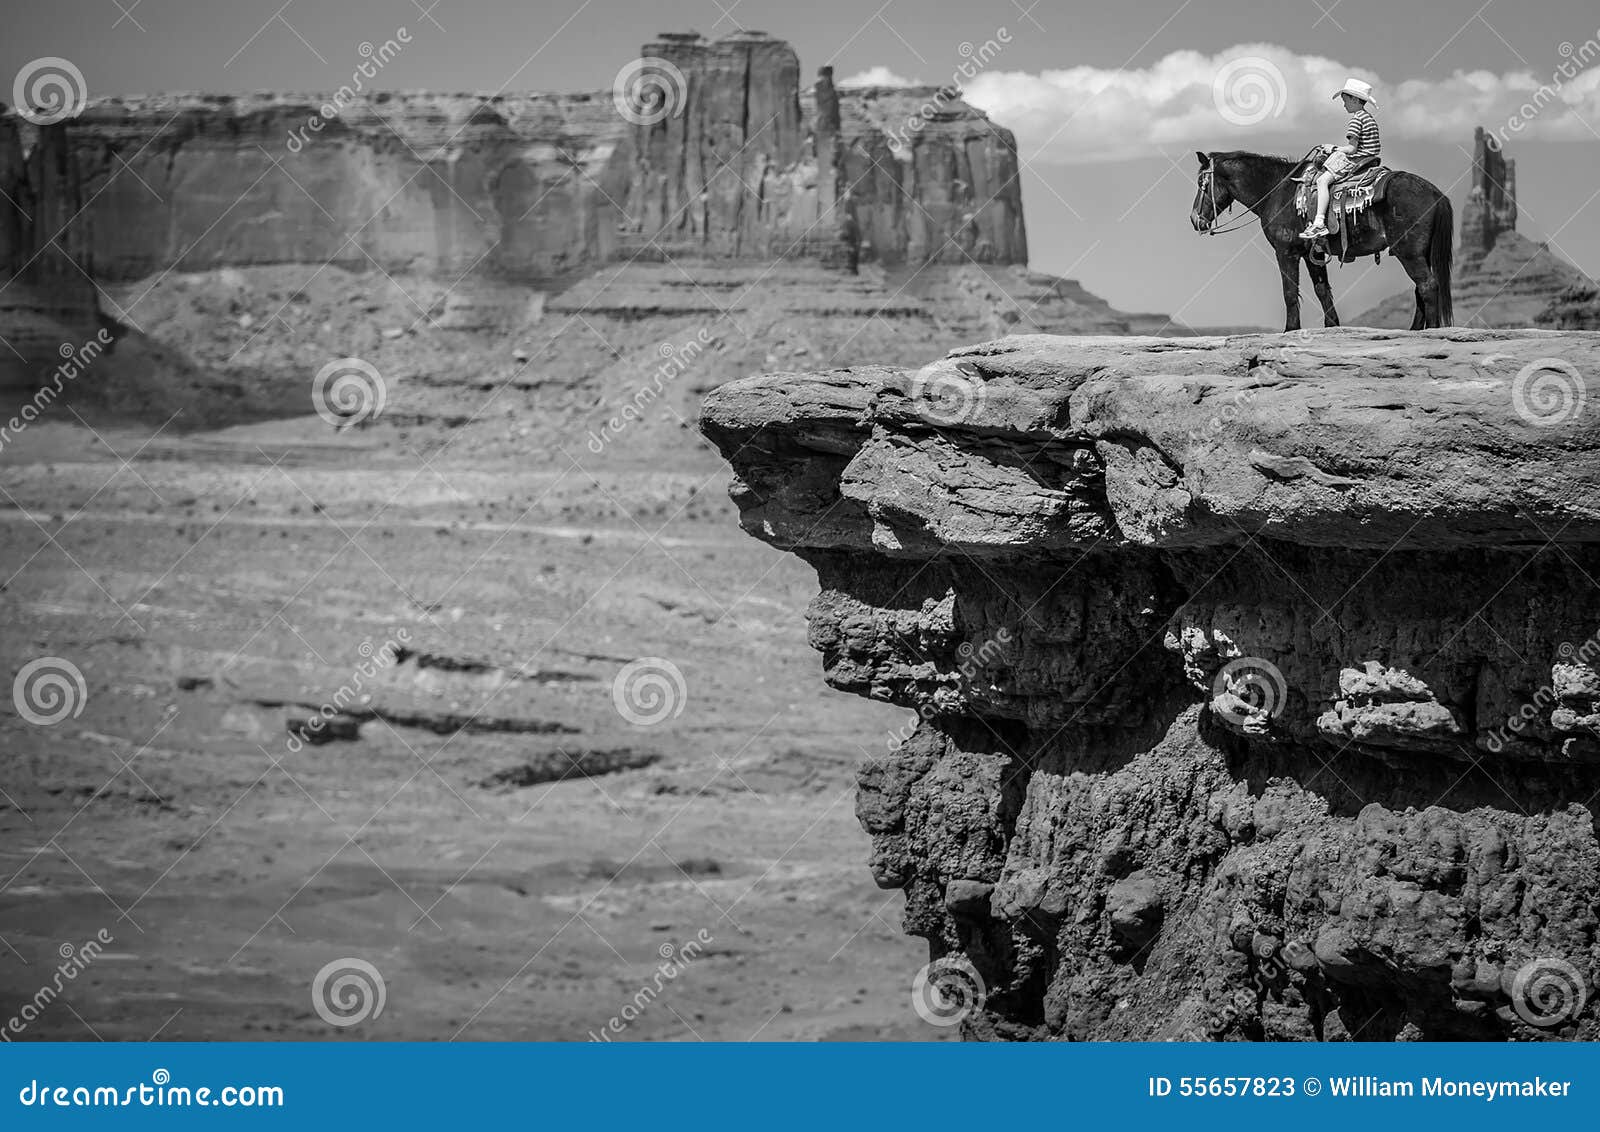 cowboy on horseback in monument valley